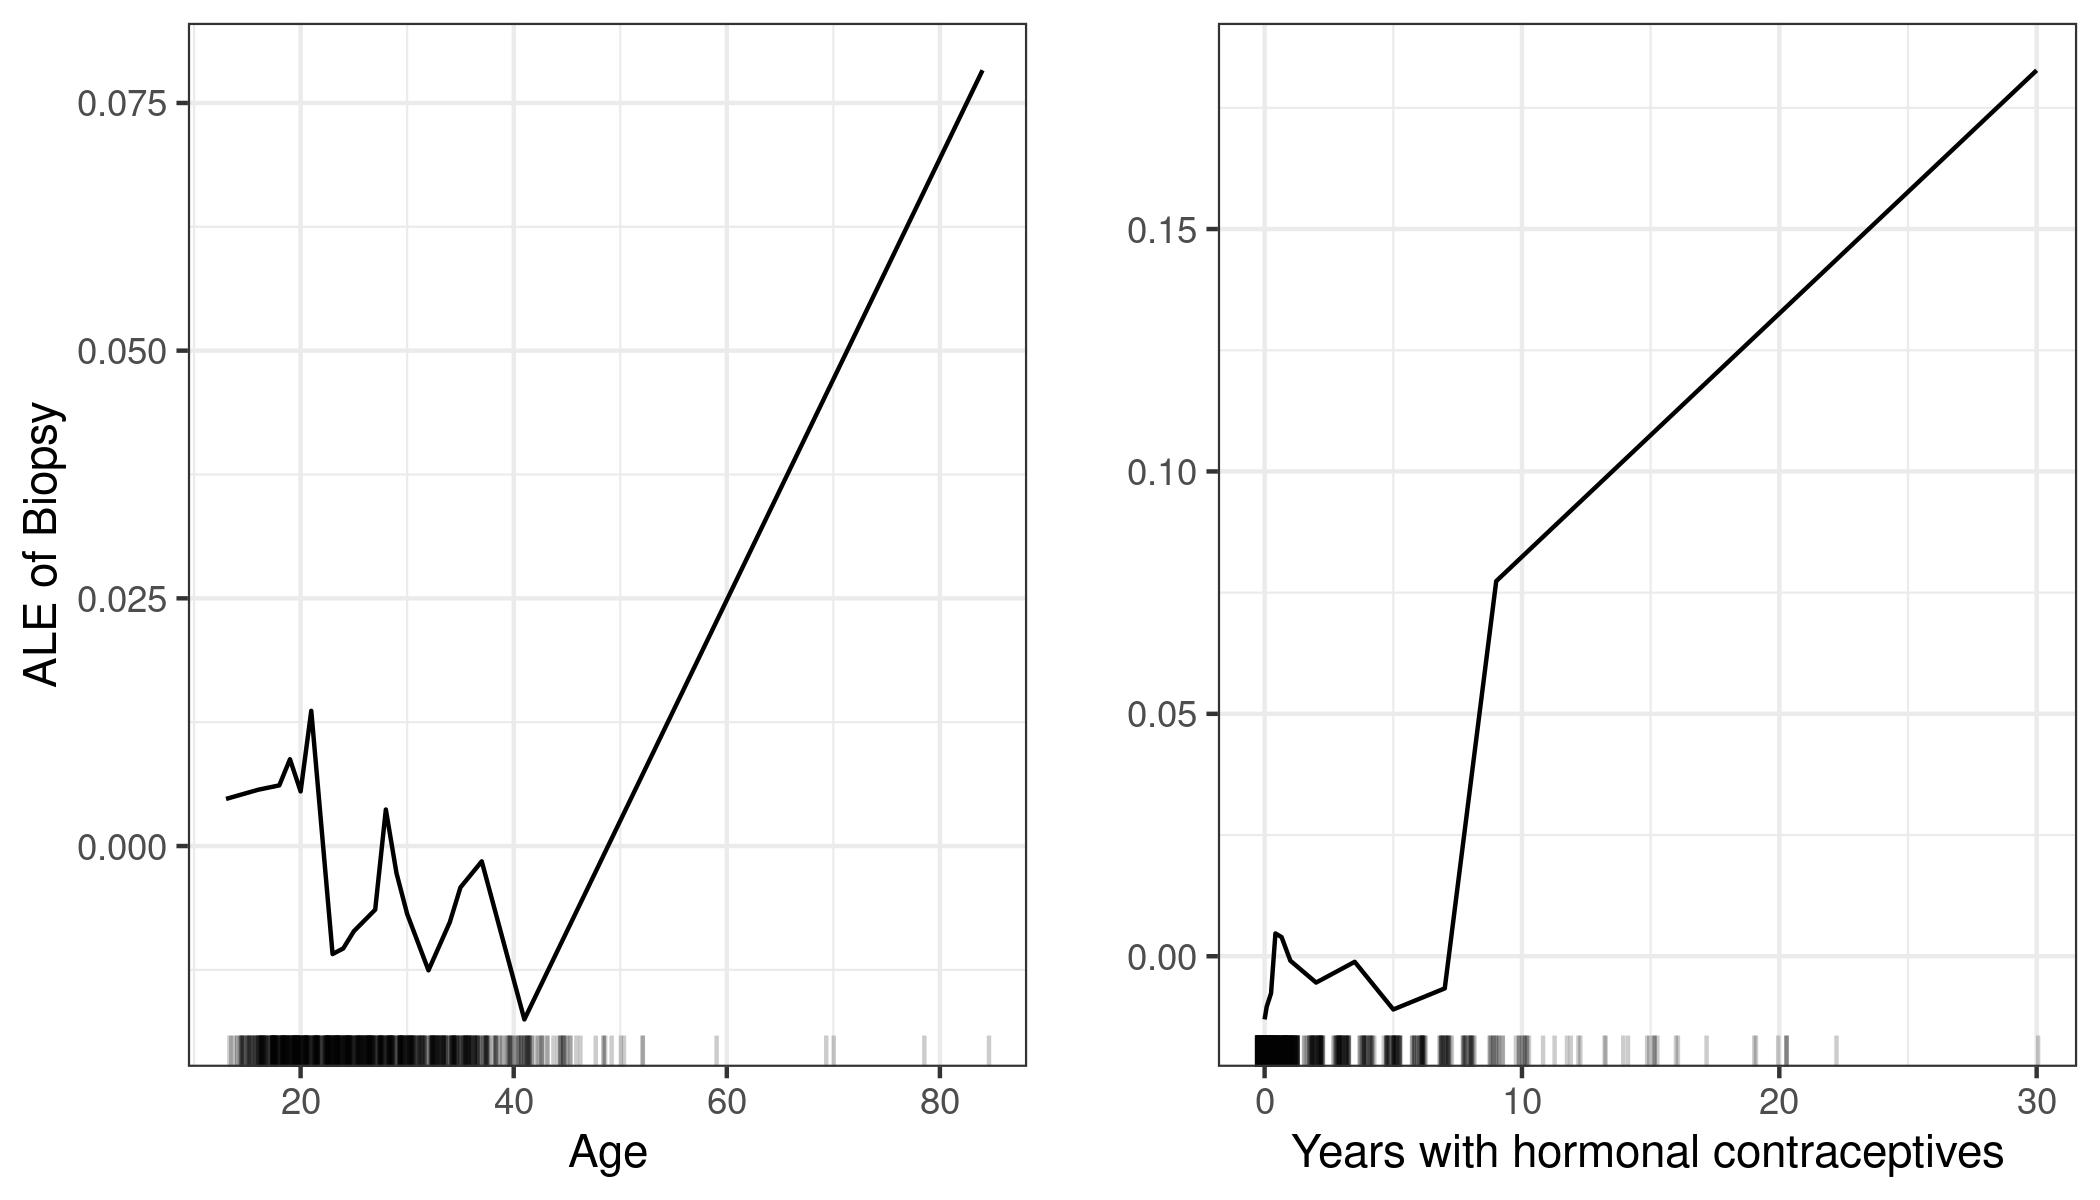 ALE plots for the effect of age and years with hormonal contraceptives on the predicted probability of cervical cancer. For the age feature, the ALE plot shows that the predicted cancer probability is low on average up to age 40 and increases after that. The number of years with hormonal contraceptives is associated with a higher predicted cancer risk after 8 years.